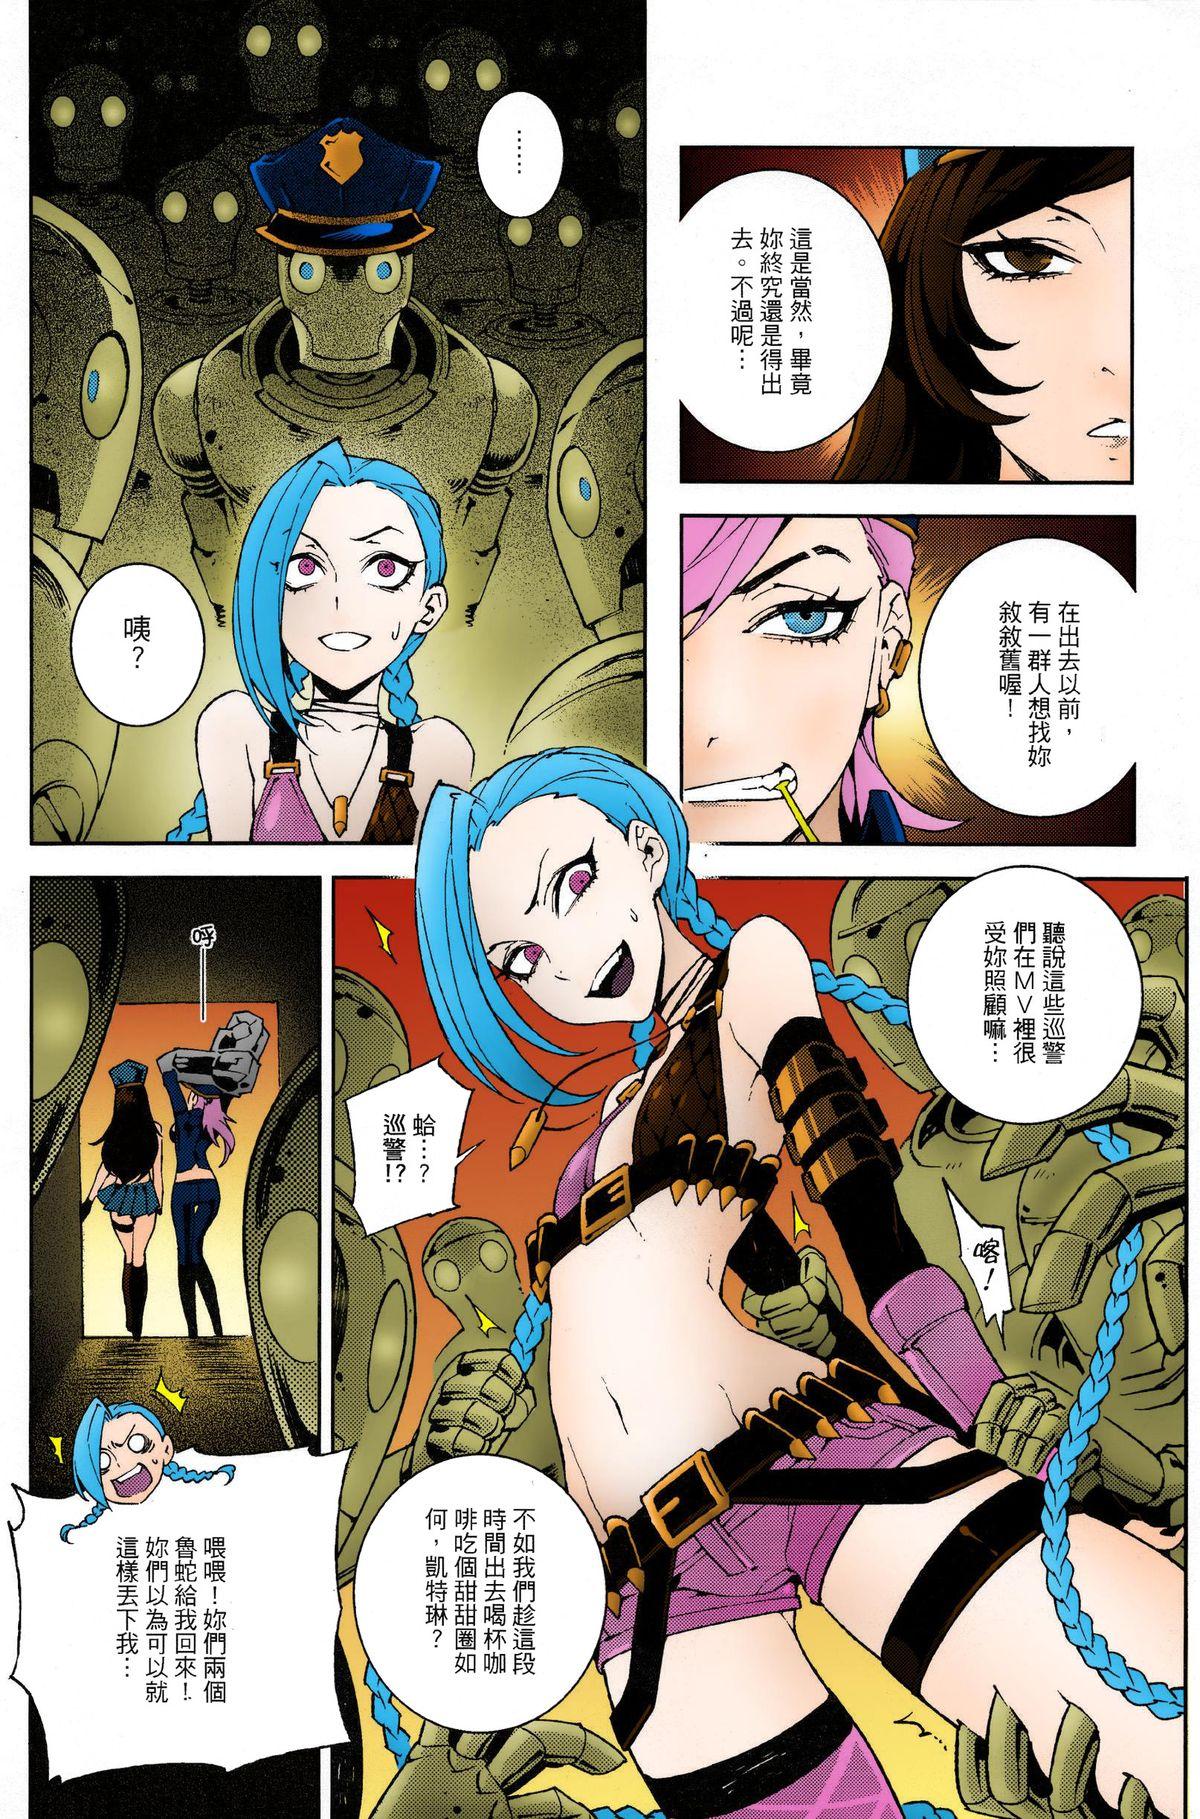 Pinoy JINX Come On! Shoot Faster - League of legends Brother Sister - Page 5